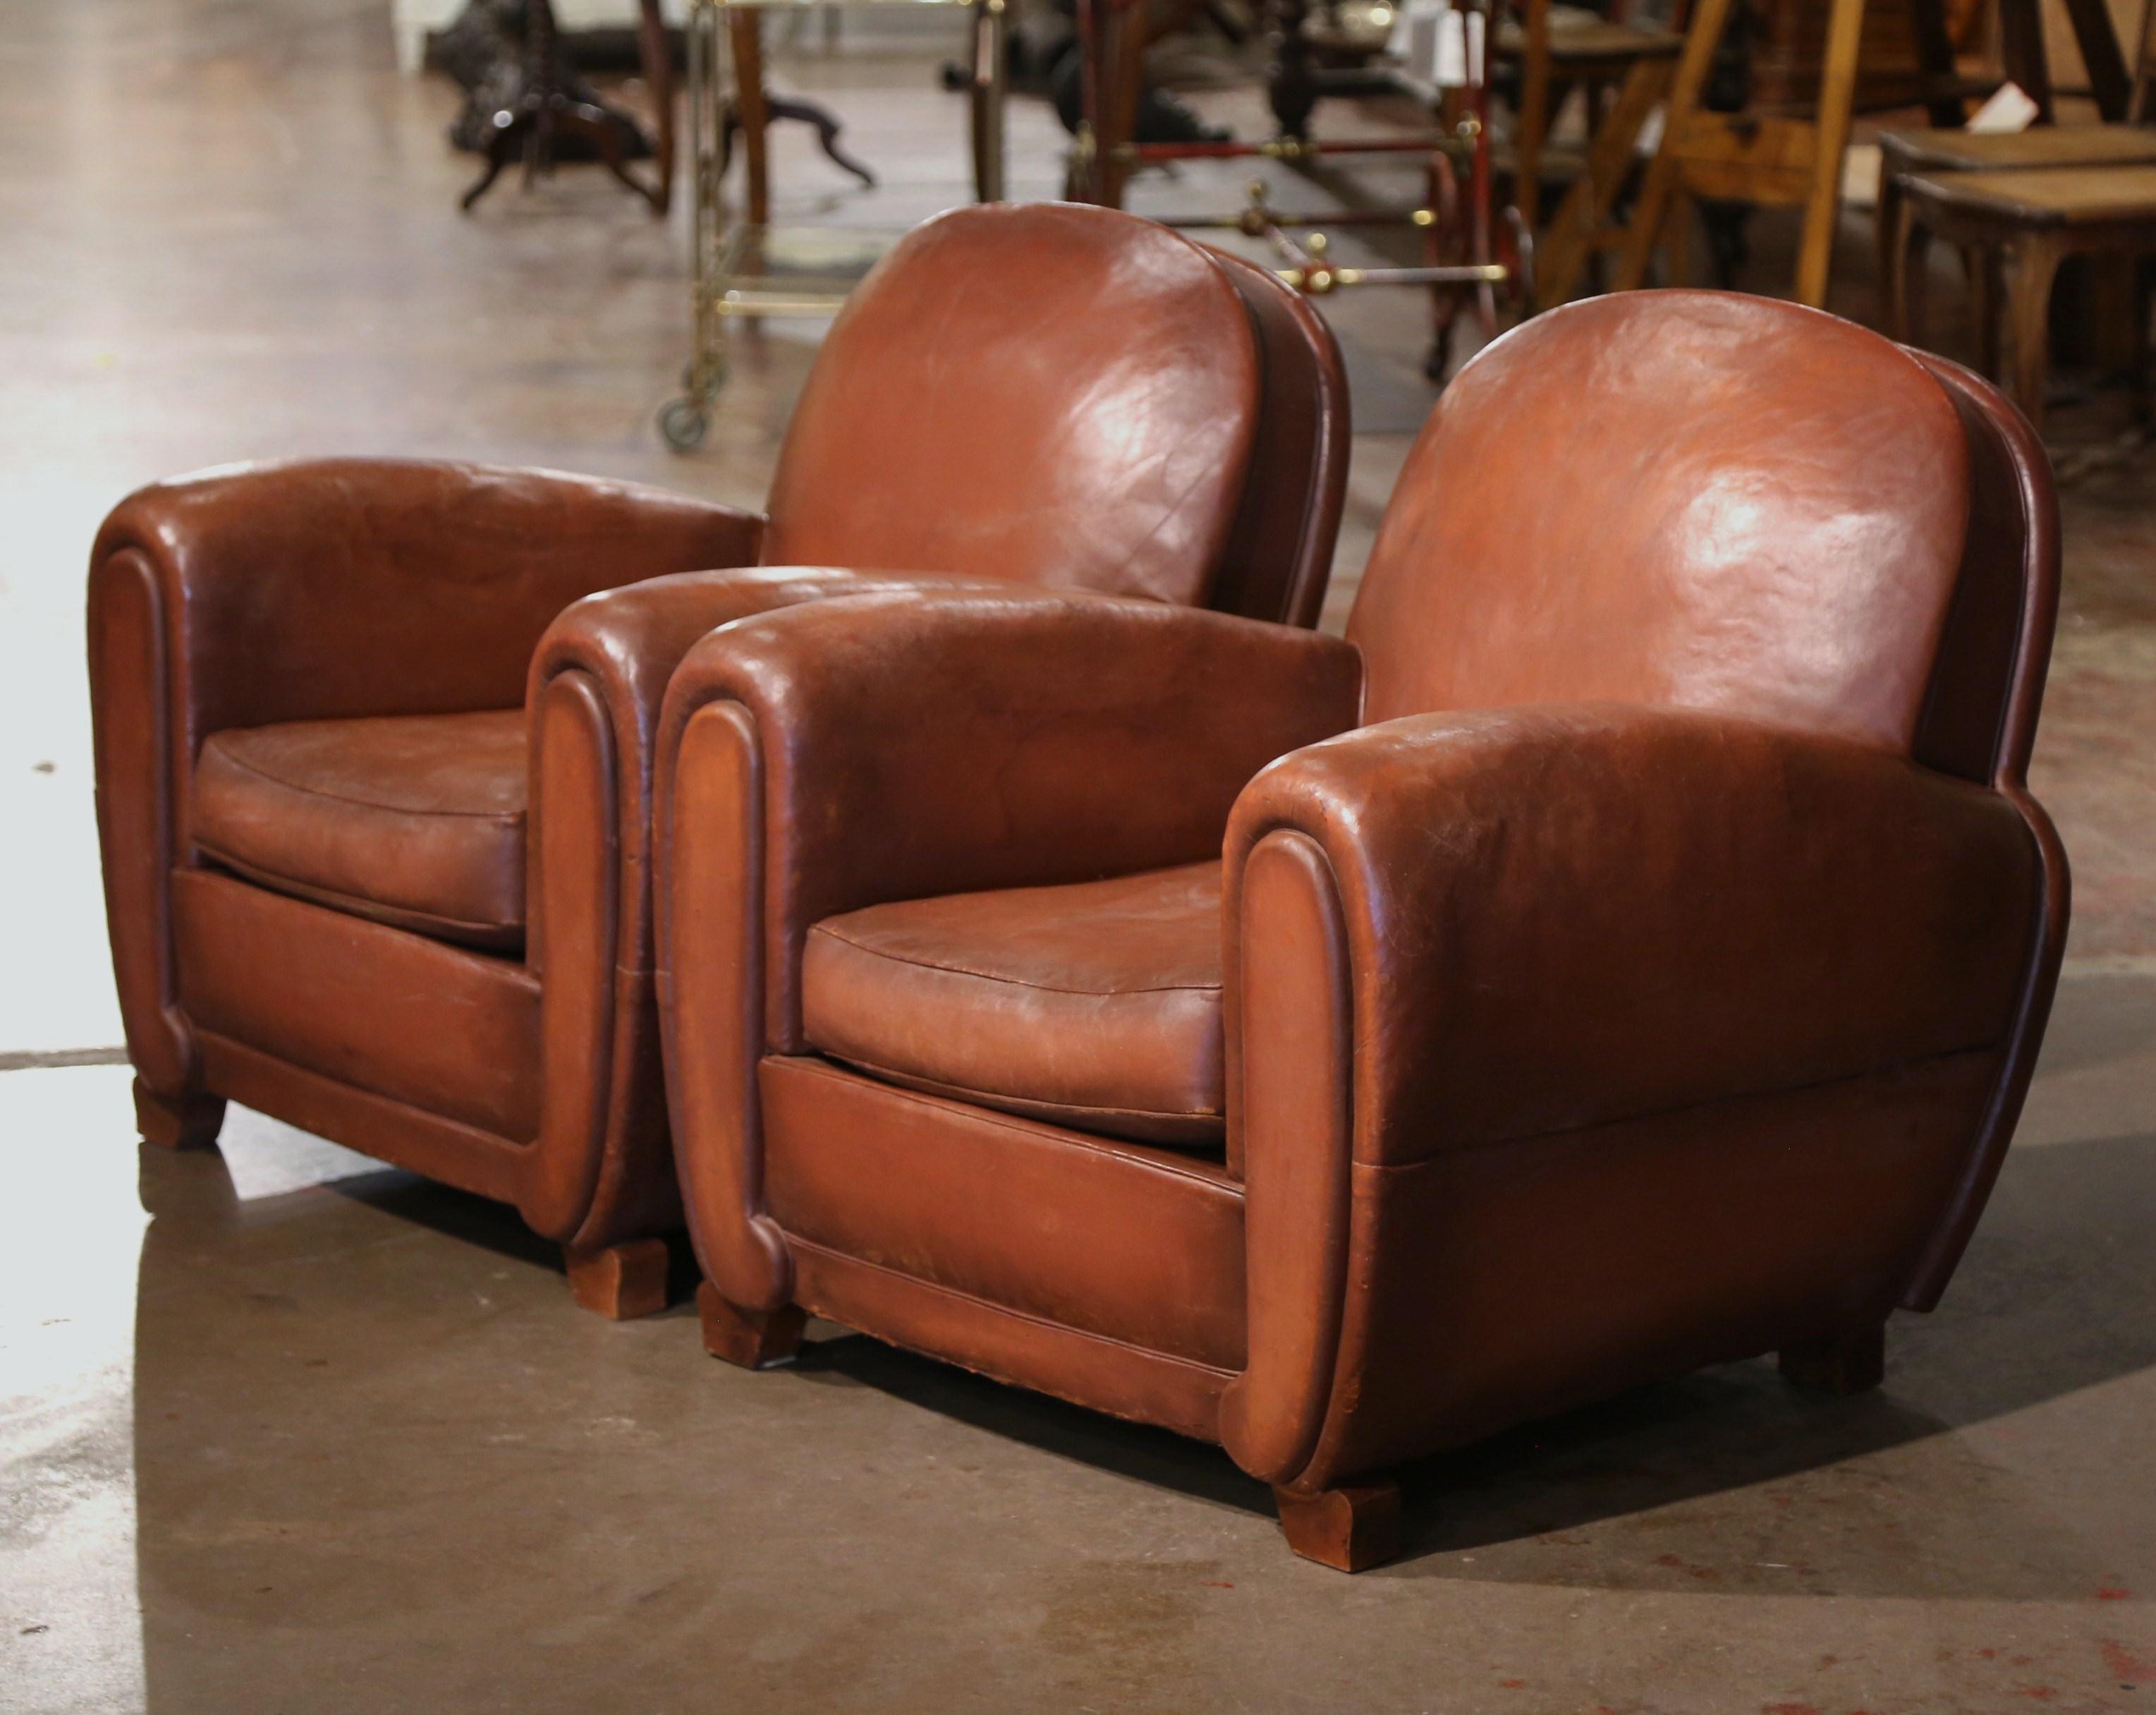 These classic, antique Art Deco club chairs were crafted in France, circa 1920. The stately chairs sit on square feet, and feature wide, rounded armrests, over an arched back. The Classic, masculine French chairs are upholstered with their original